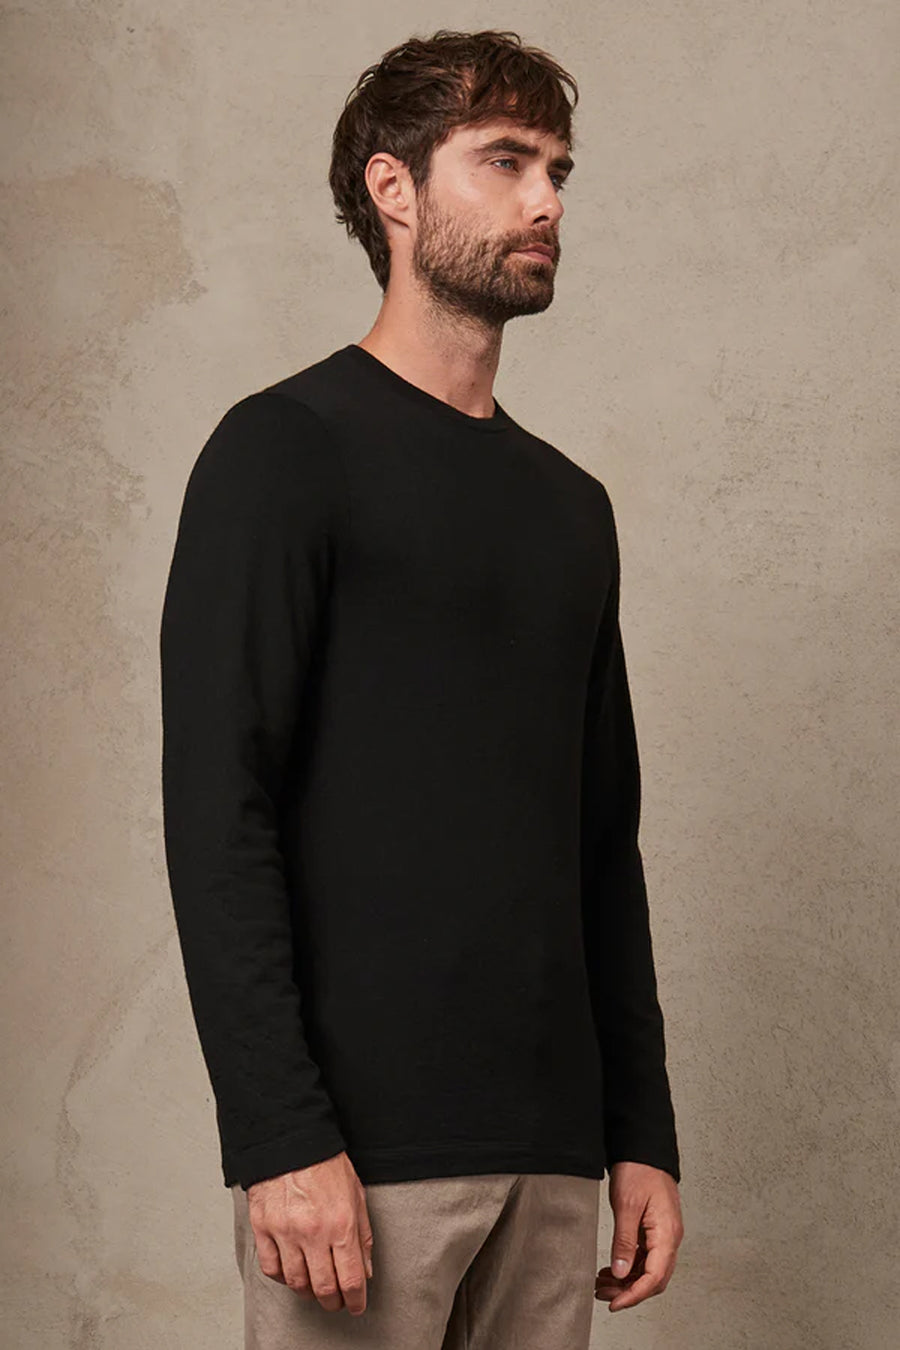 Buy the Transit Long Sleeve Heavy Wool T-Shirt Black at Intro. Spend £50 for free UK delivery. Official stockists. We ship worldwide.